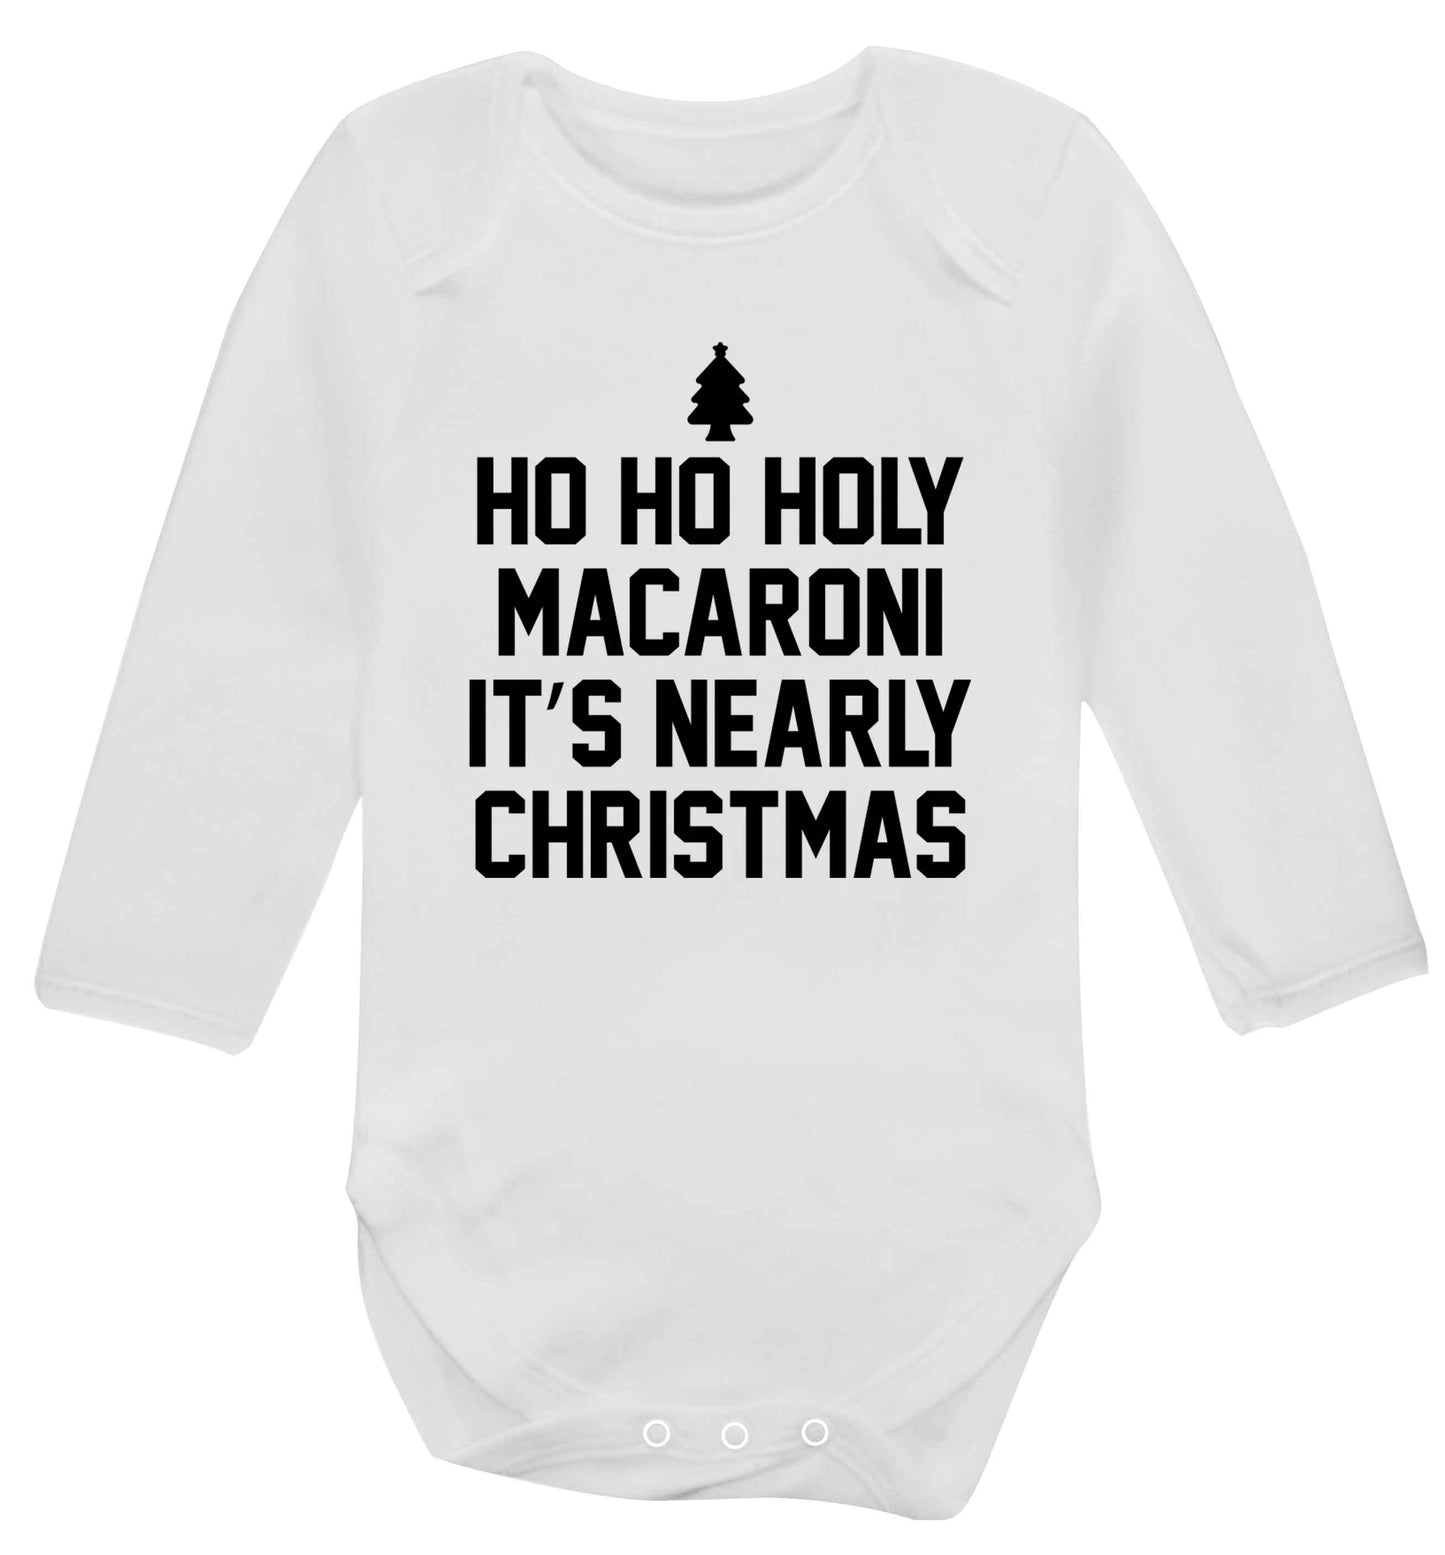 Ho ho holy macaroni it's nearly Christmas Baby Vest long sleeved white 6-12 months